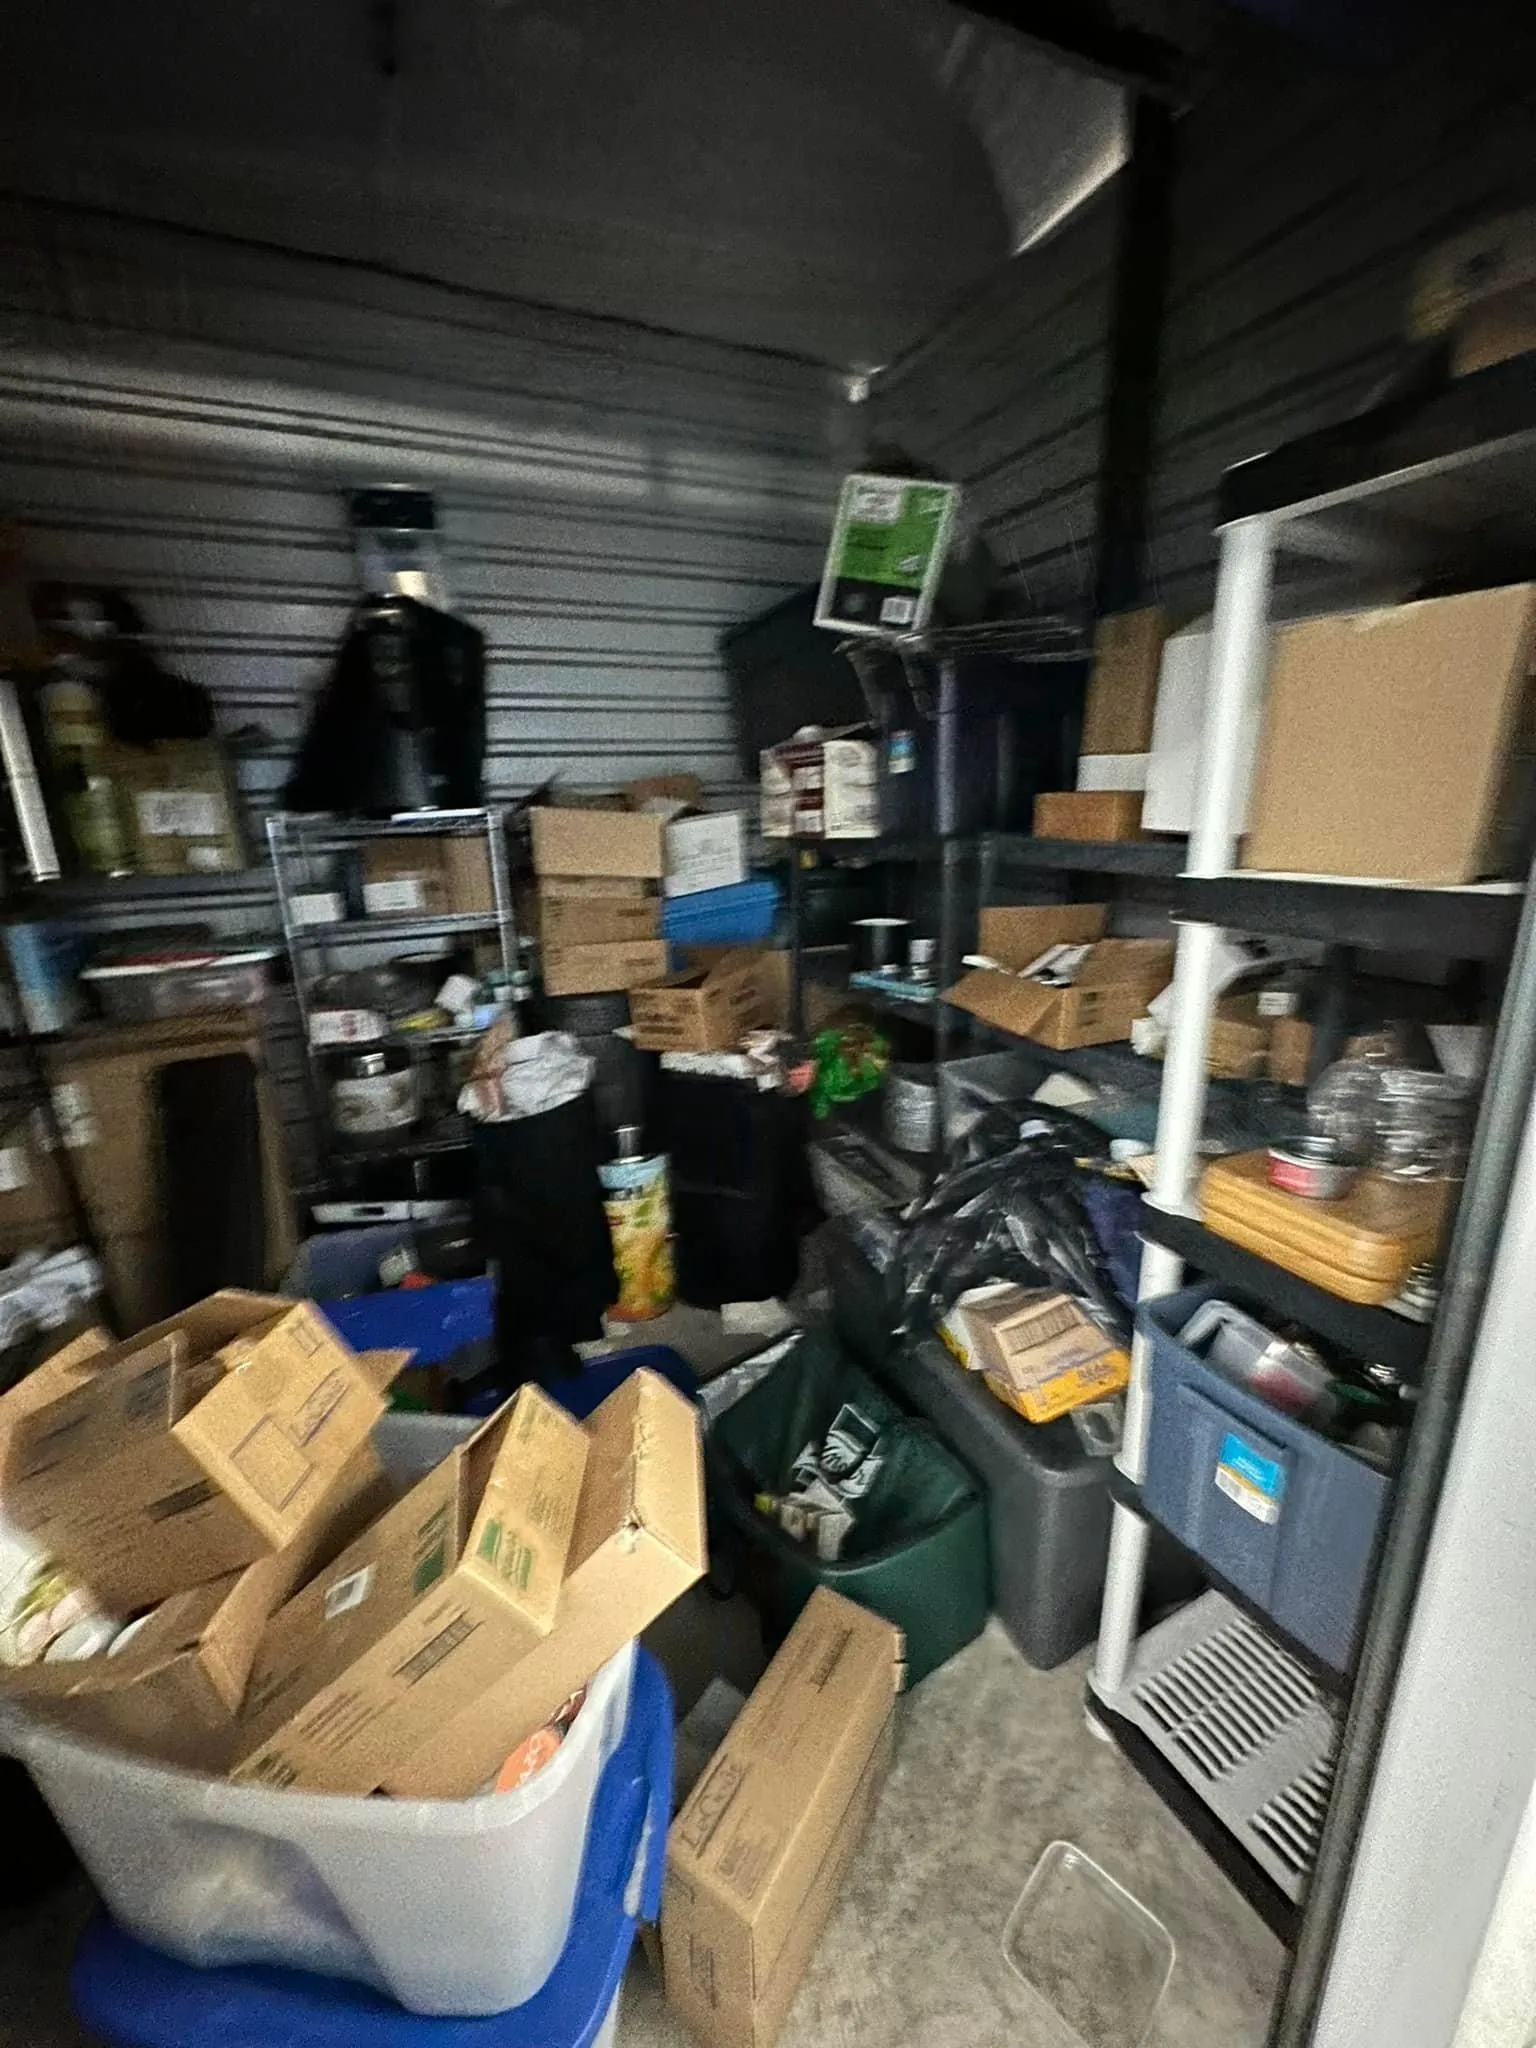 Appliance Removal for Junk Heroes in Orlando, FL